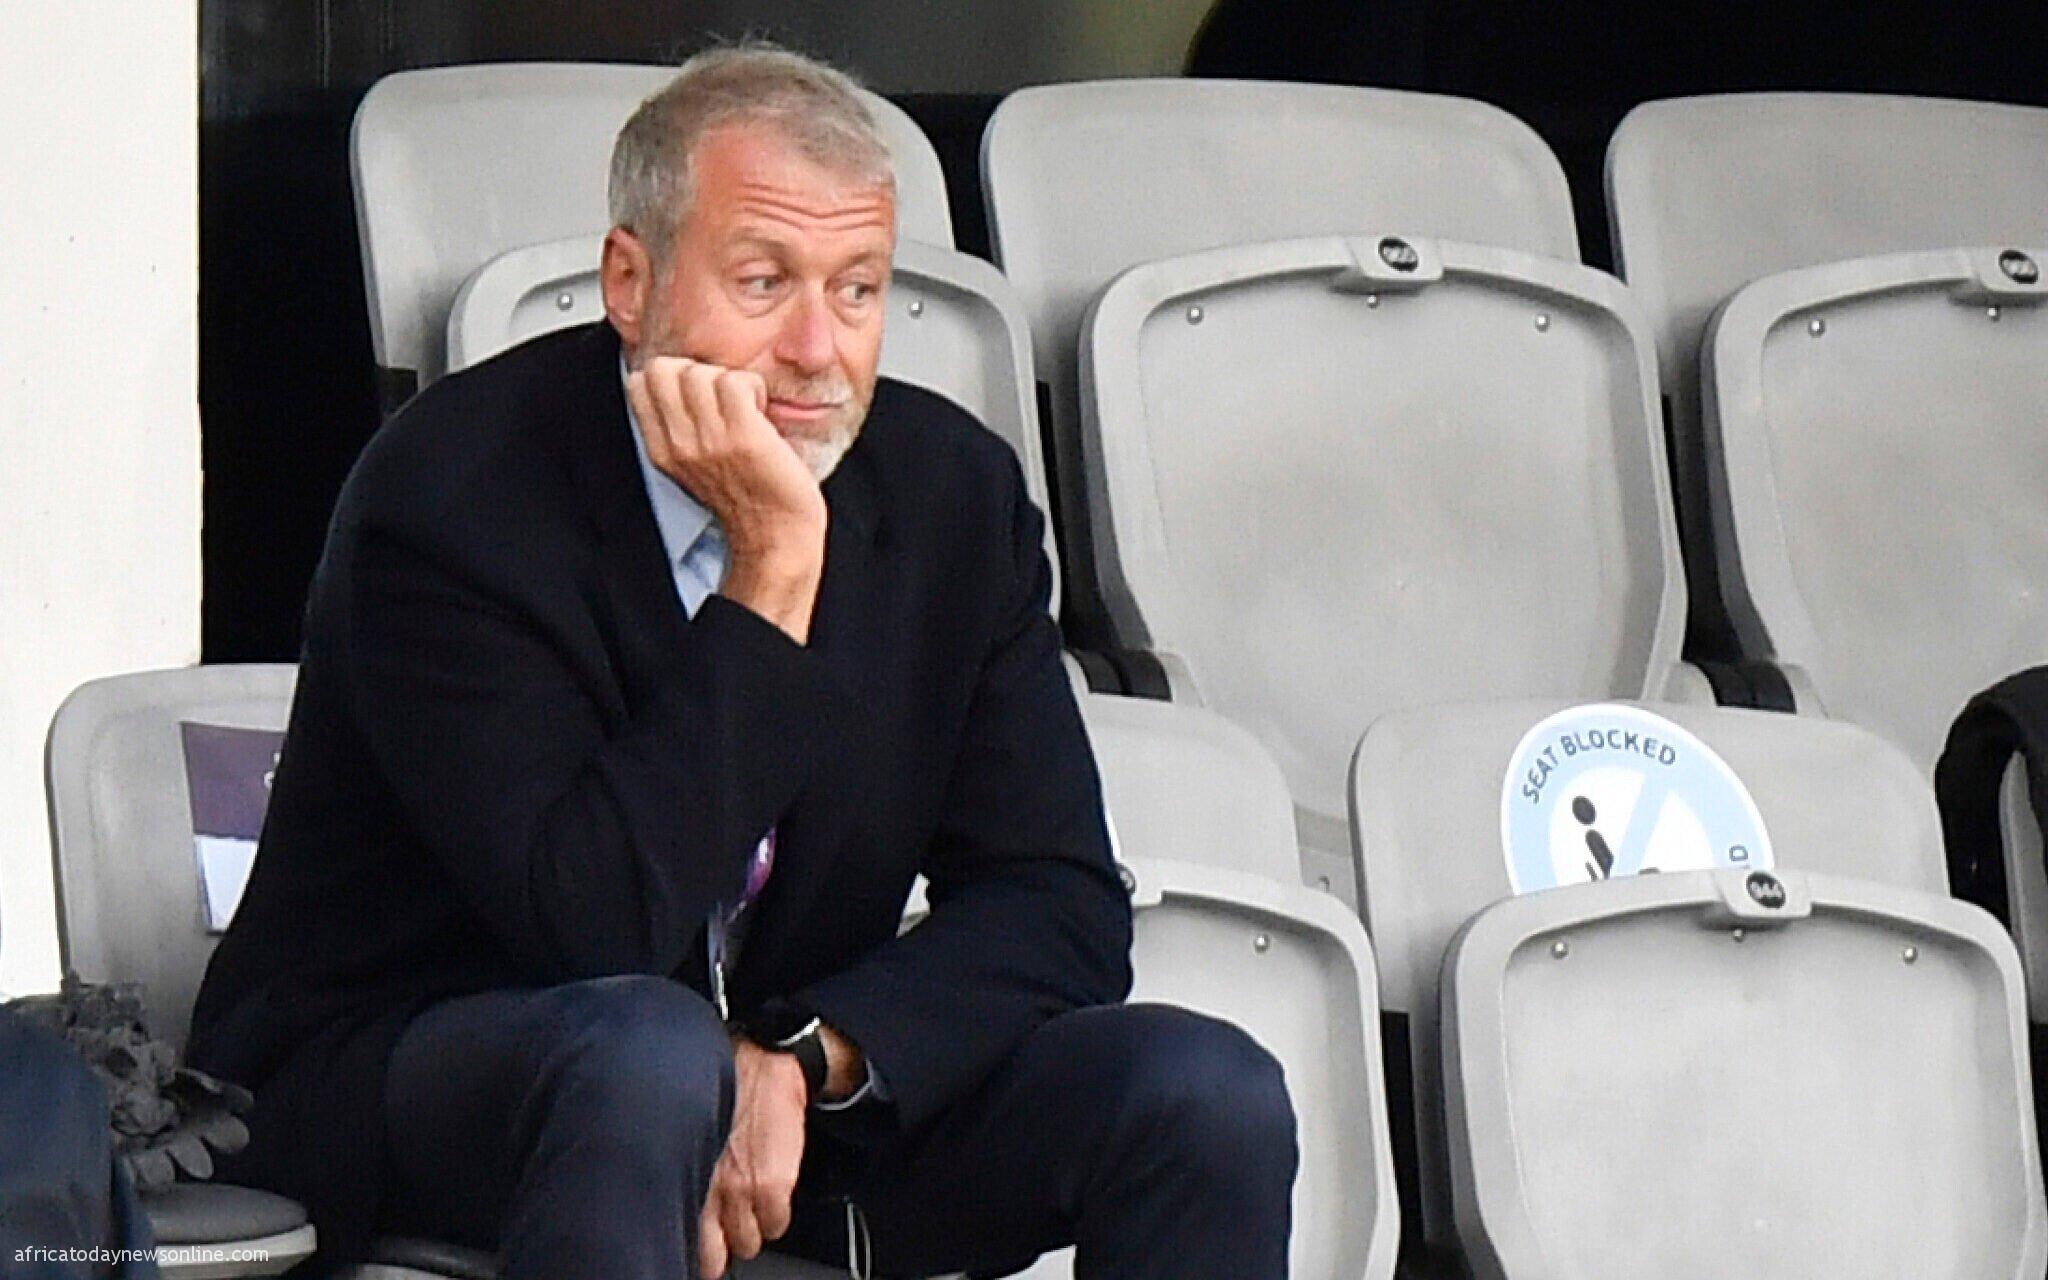 Why UK Blocked Abramovich From Selling Chelsea